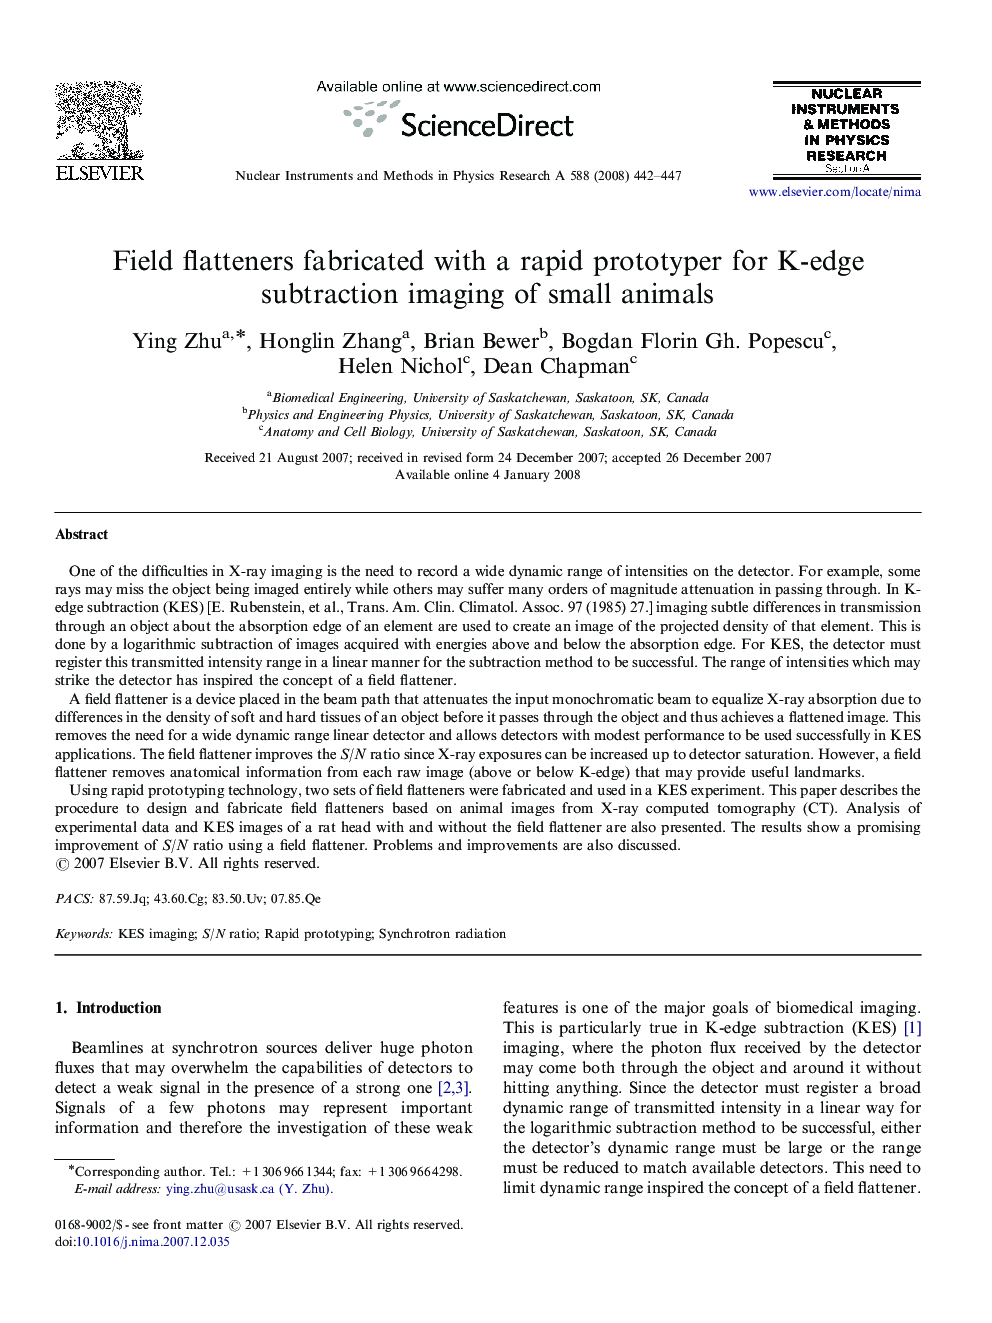 Field flatteners fabricated with a rapid prototyper for K-edge subtraction imaging of small animals